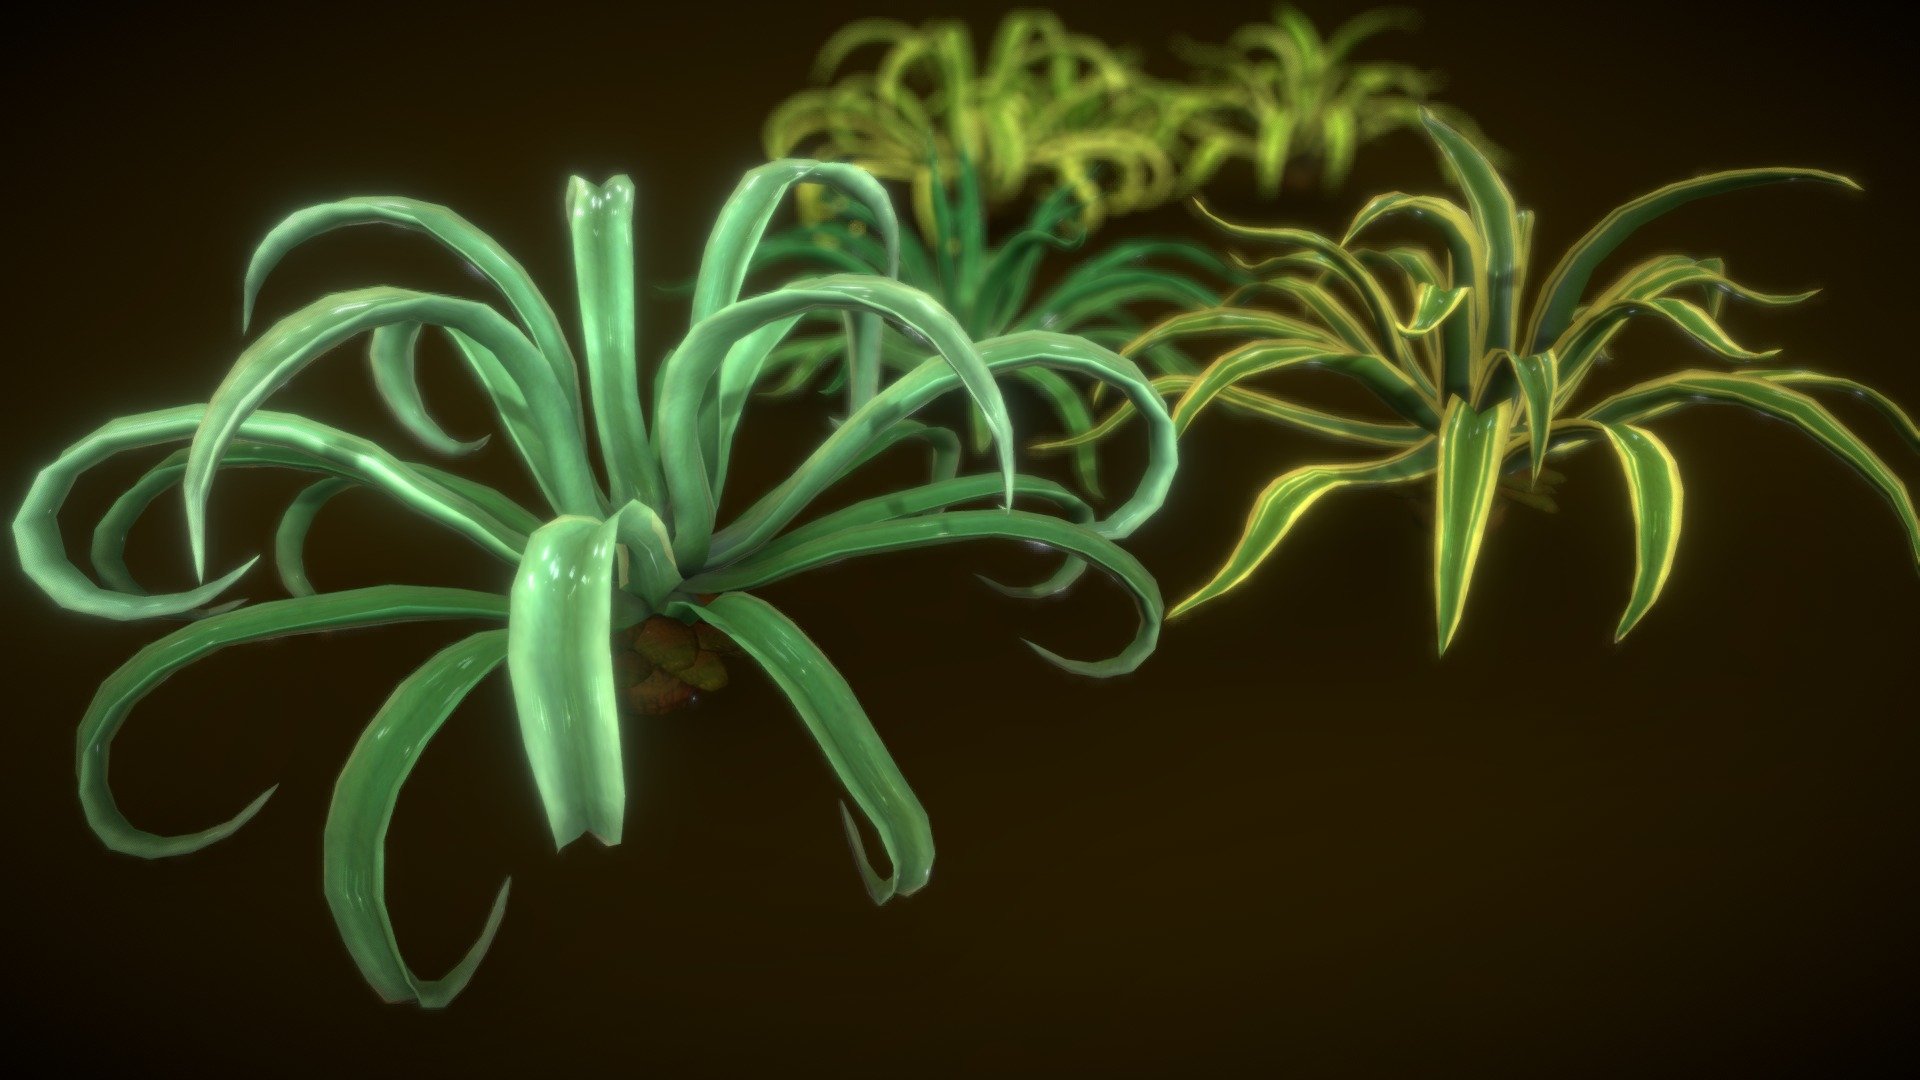 This is model 3D lowpolys :
-Tree Octopus Agave : 11612 polys/ 22570Tris/ 11839Verts
- Texture size : 1024/1024
Prized for its graceful foliage, the Octopus Agave is an evergreen succulent perennial that can grow to heights of 3-4 ft tall. The Octopus Agave is native to Cliffs in Southern Mexico, and the leaves contain high concentrations of Smilagenen, often used to make a brush with built in soap. It can most commonly be found in ornamental gardens in warm climates 3d model